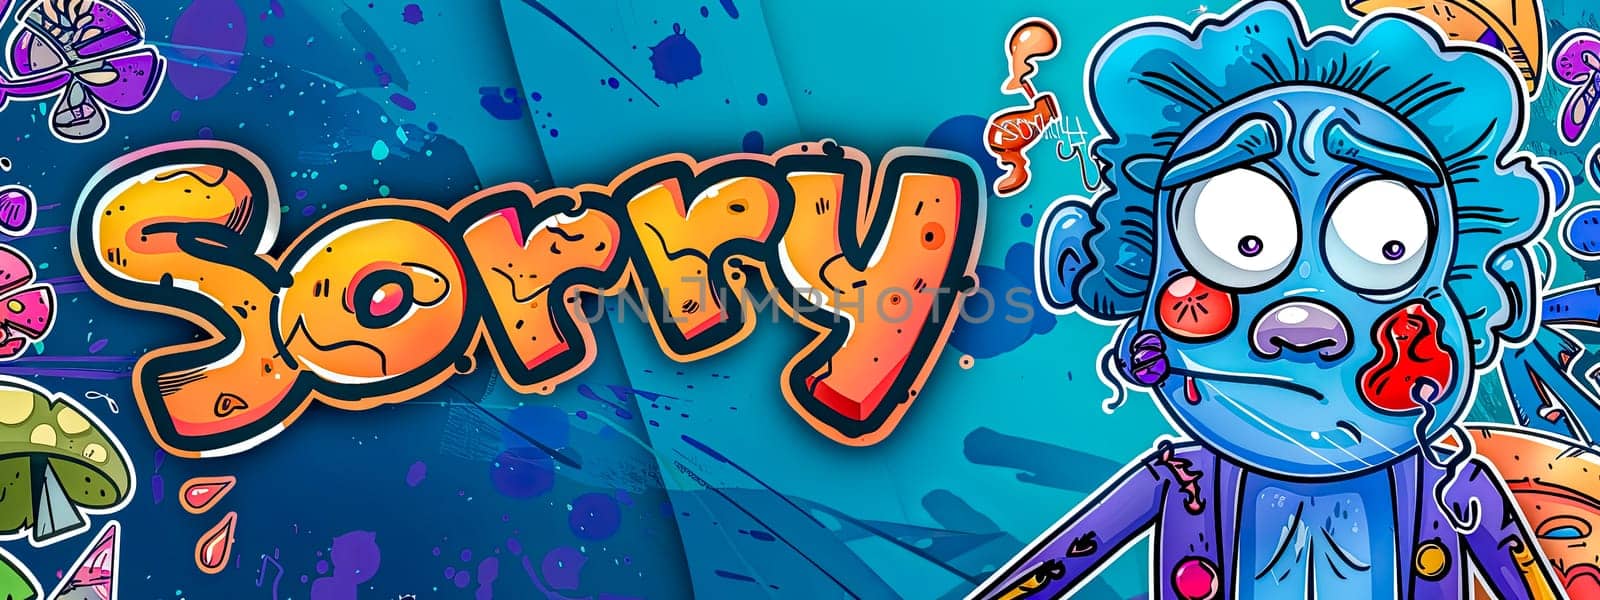 Expressive and playful colorful cartoon apology banner with vibrant and bold graffiti-style artwork and whimsical character illustration